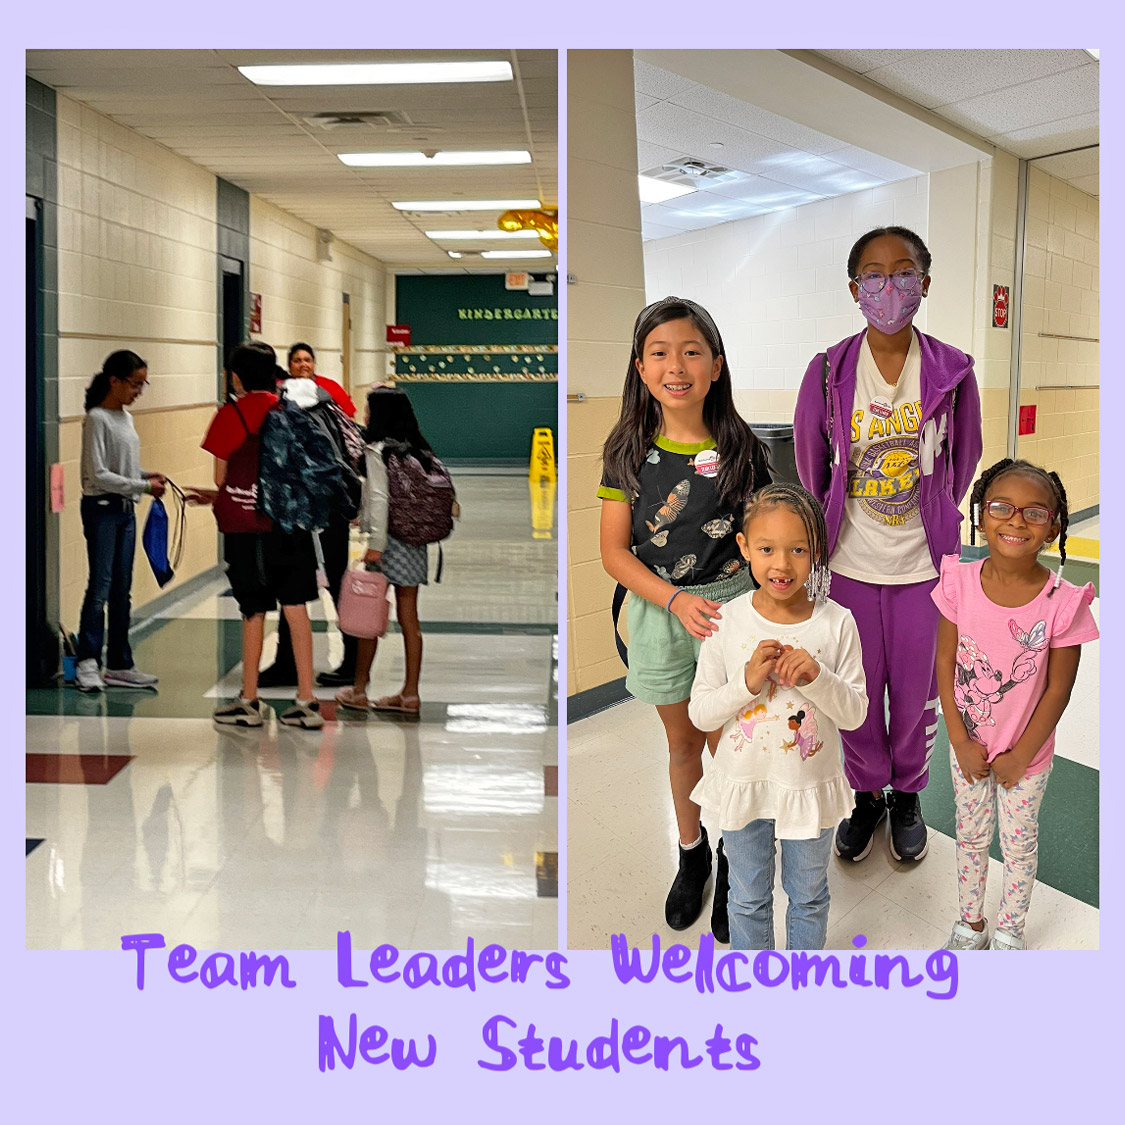 Team leaders welcoming new students.